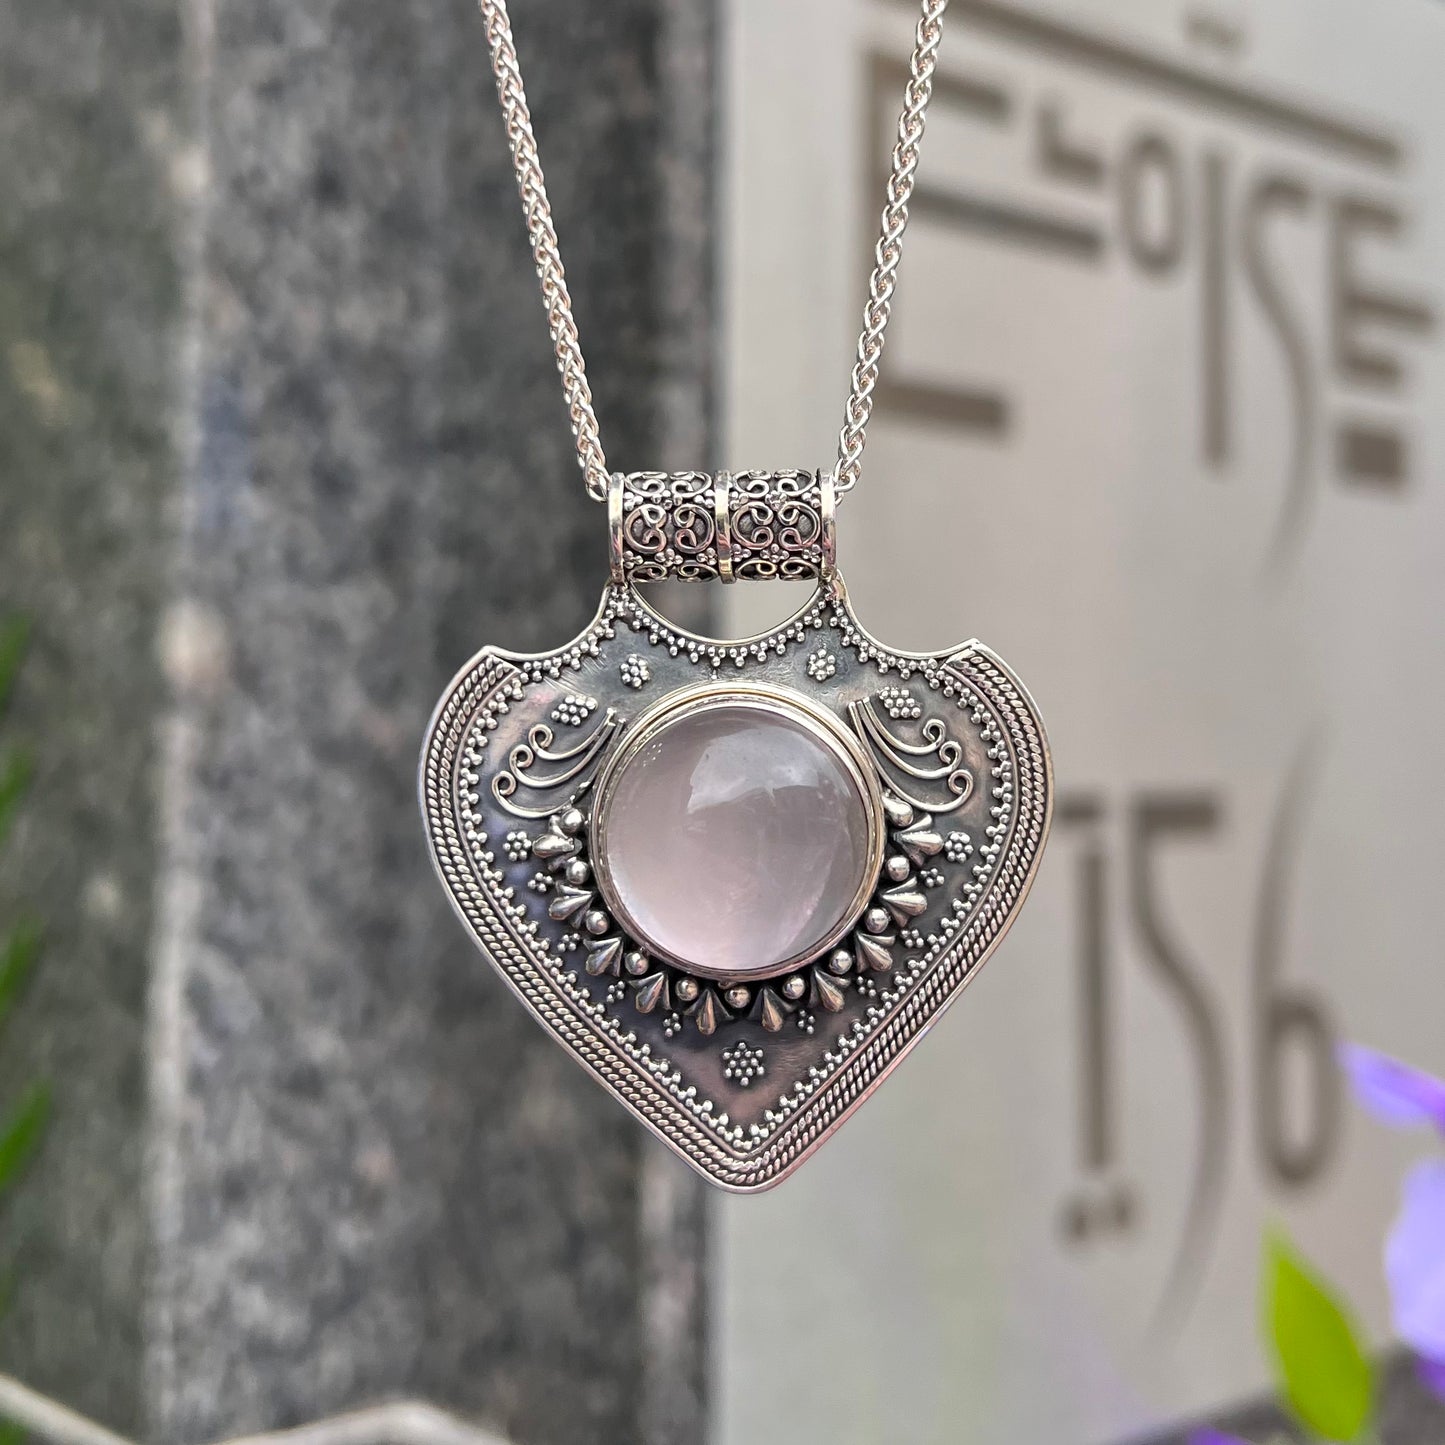 Chunky Bohemian Rose Quartz Sterling Silver Pendant and Chain